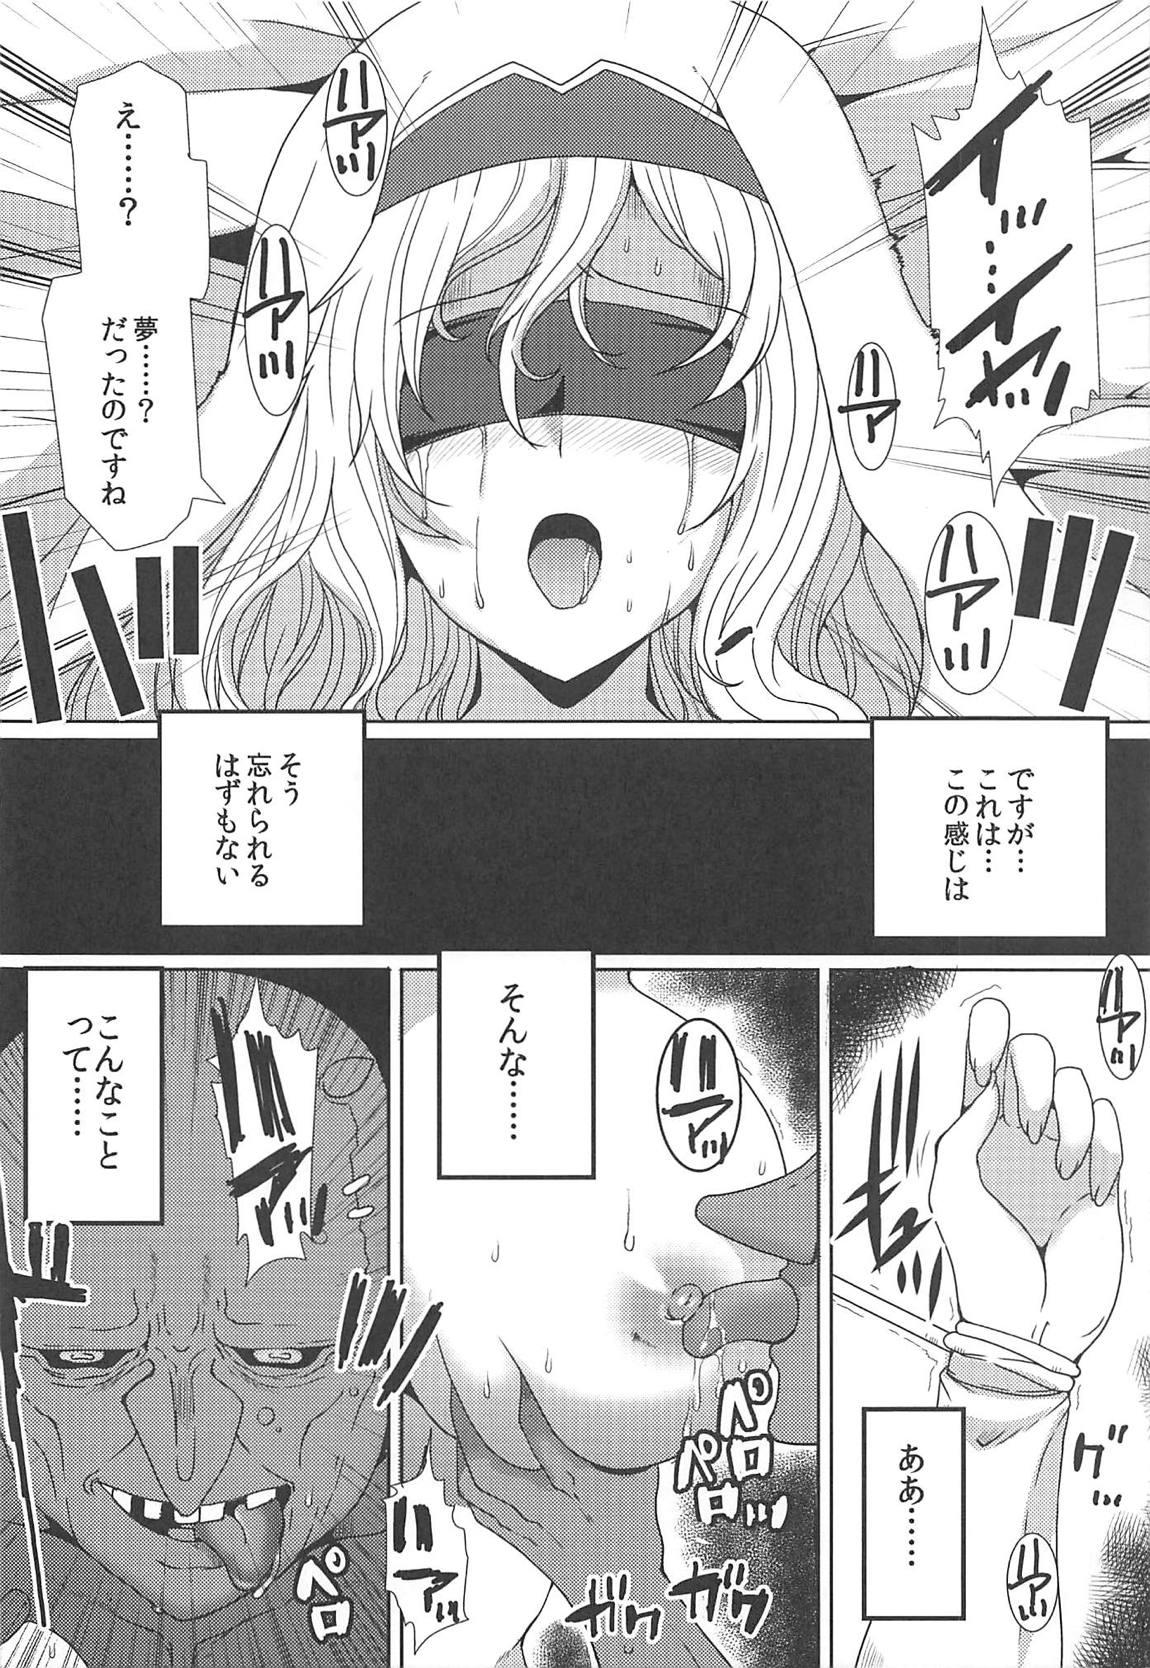 Gaygroupsex Subete Yo wa Koto mo Nashi - All the world is things even without - Goblin slayer Stepmother - Page 9